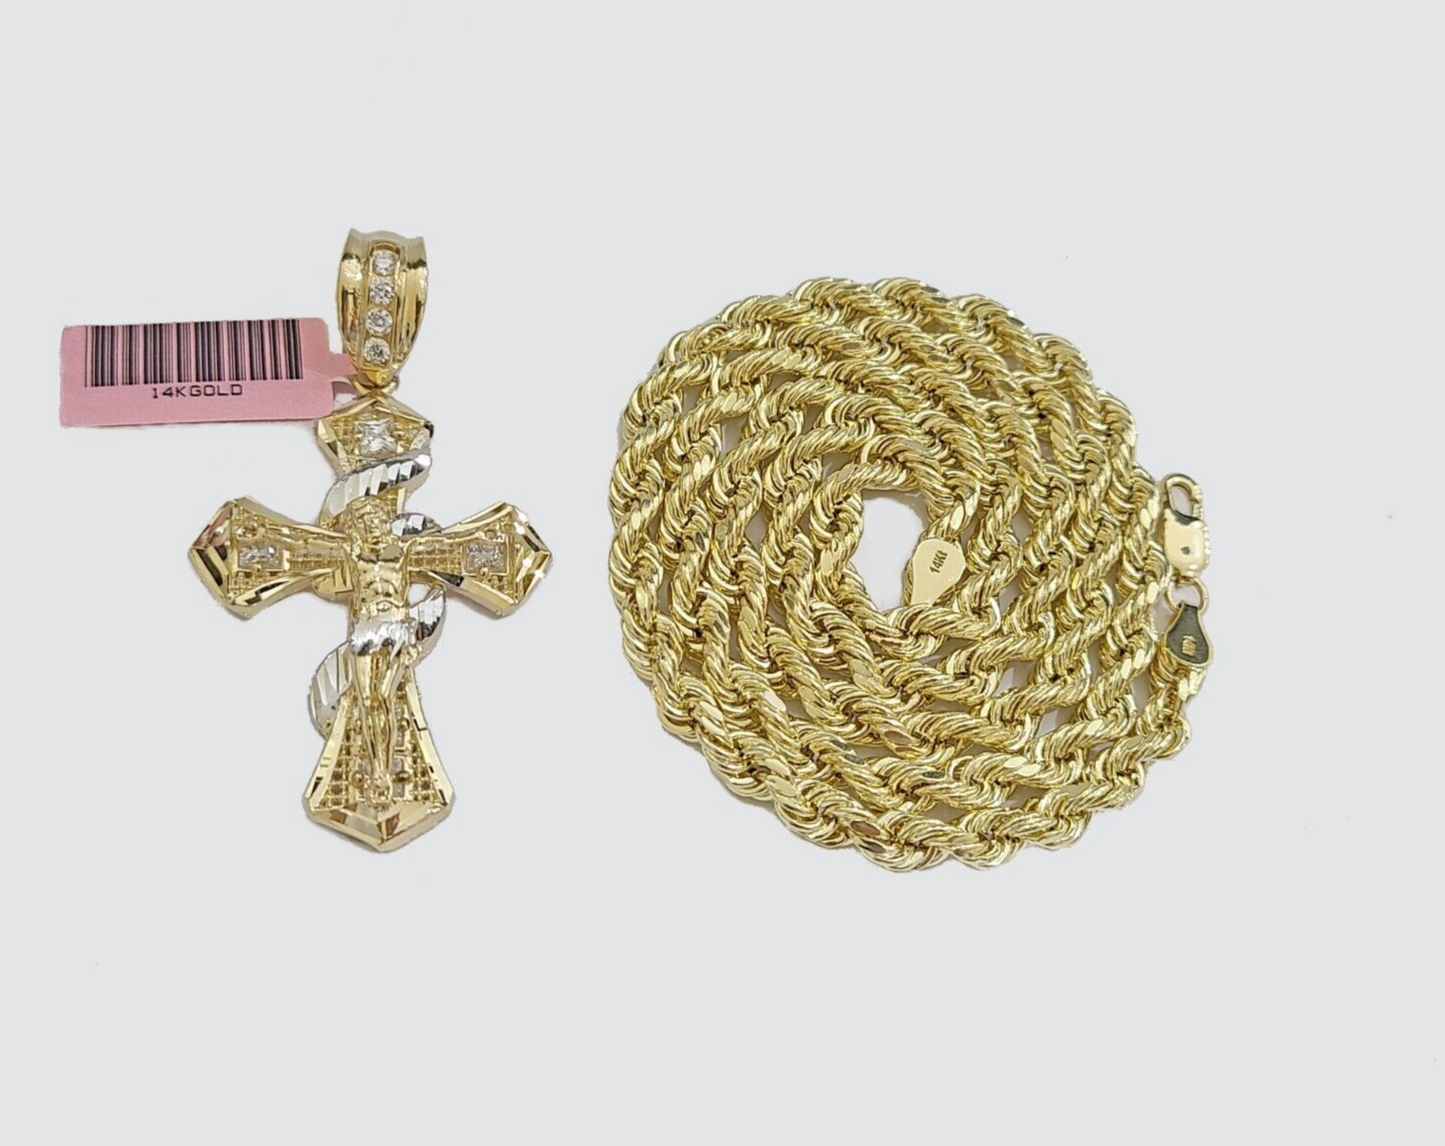 Real 14k Yellow Gold Rope Chain 5mm 24'' Necklace Jesus Cross Charm Pendant 14kt